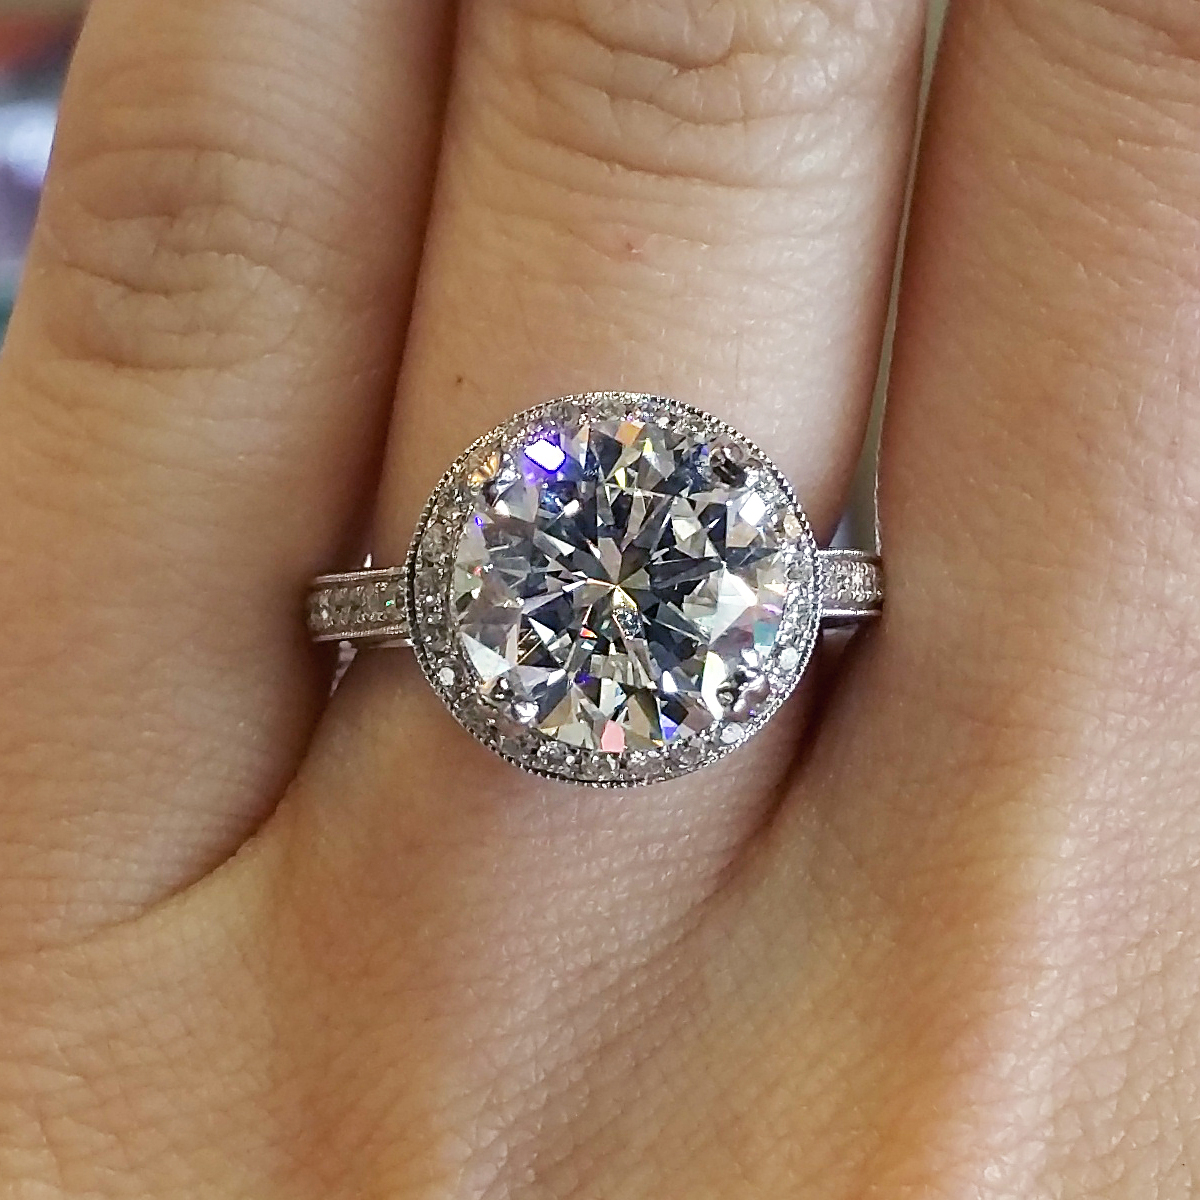 Top 20 Engagement Rings Of 2015 Raymond Lee Jewelers 3436